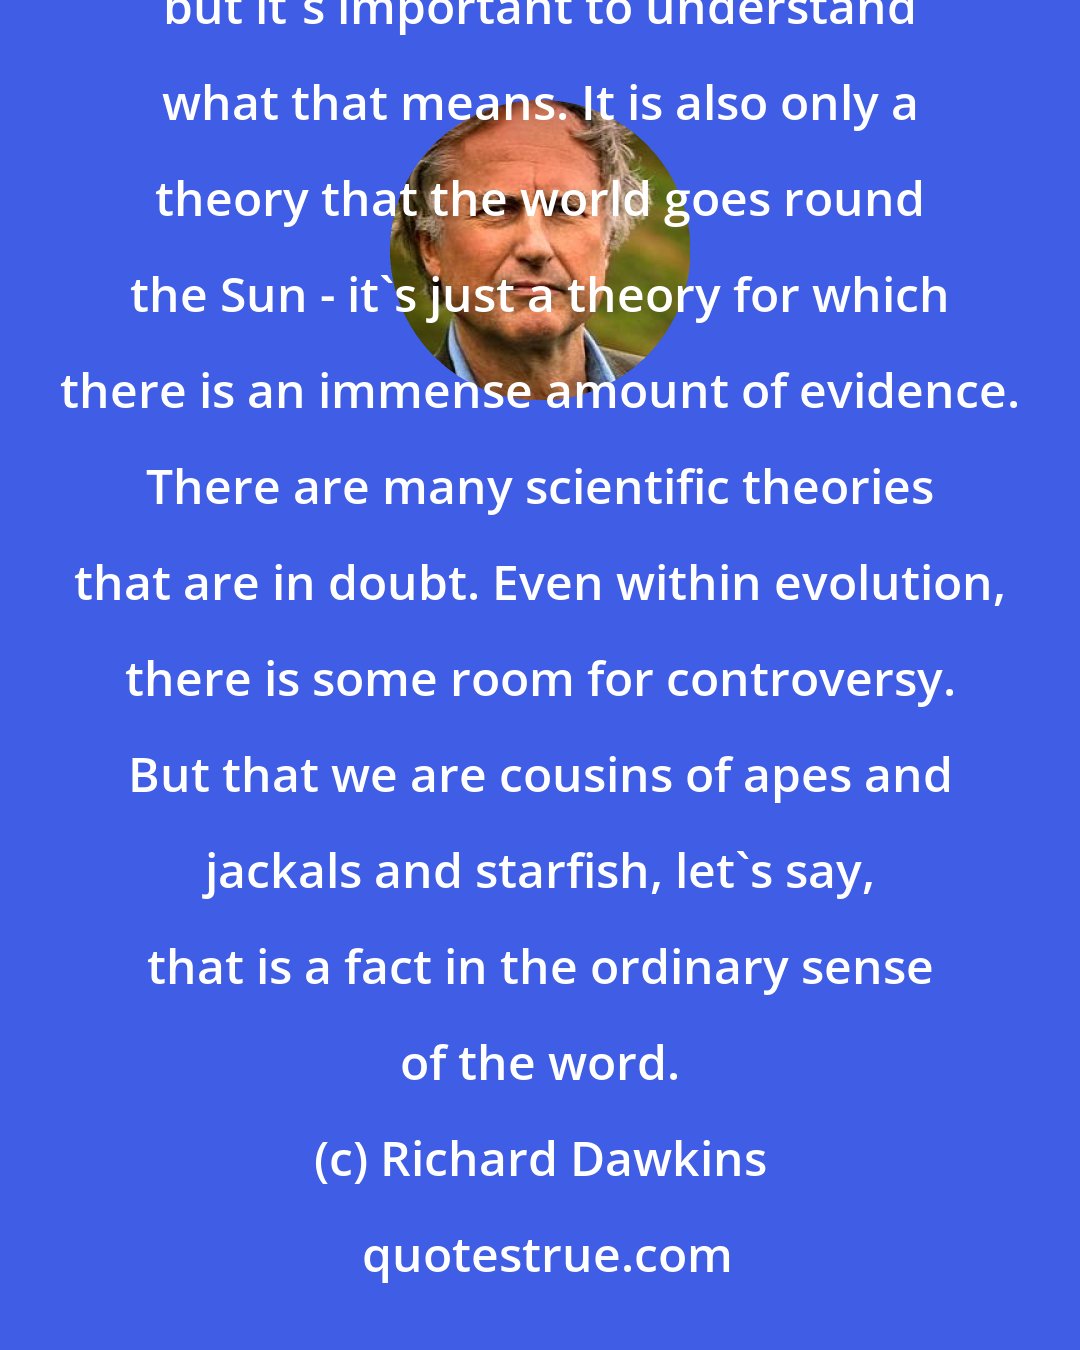 Richard Dawkins: People sometimes try to score debating points by saying, Evolution is only a theory. That is correct, but it's important to understand what that means. It is also only a theory that the world goes round the Sun - it's just a theory for which there is an immense amount of evidence. There are many scientific theories that are in doubt. Even within evolution, there is some room for controversy. But that we are cousins of apes and jackals and starfish, let's say, that is a fact in the ordinary sense of the word.